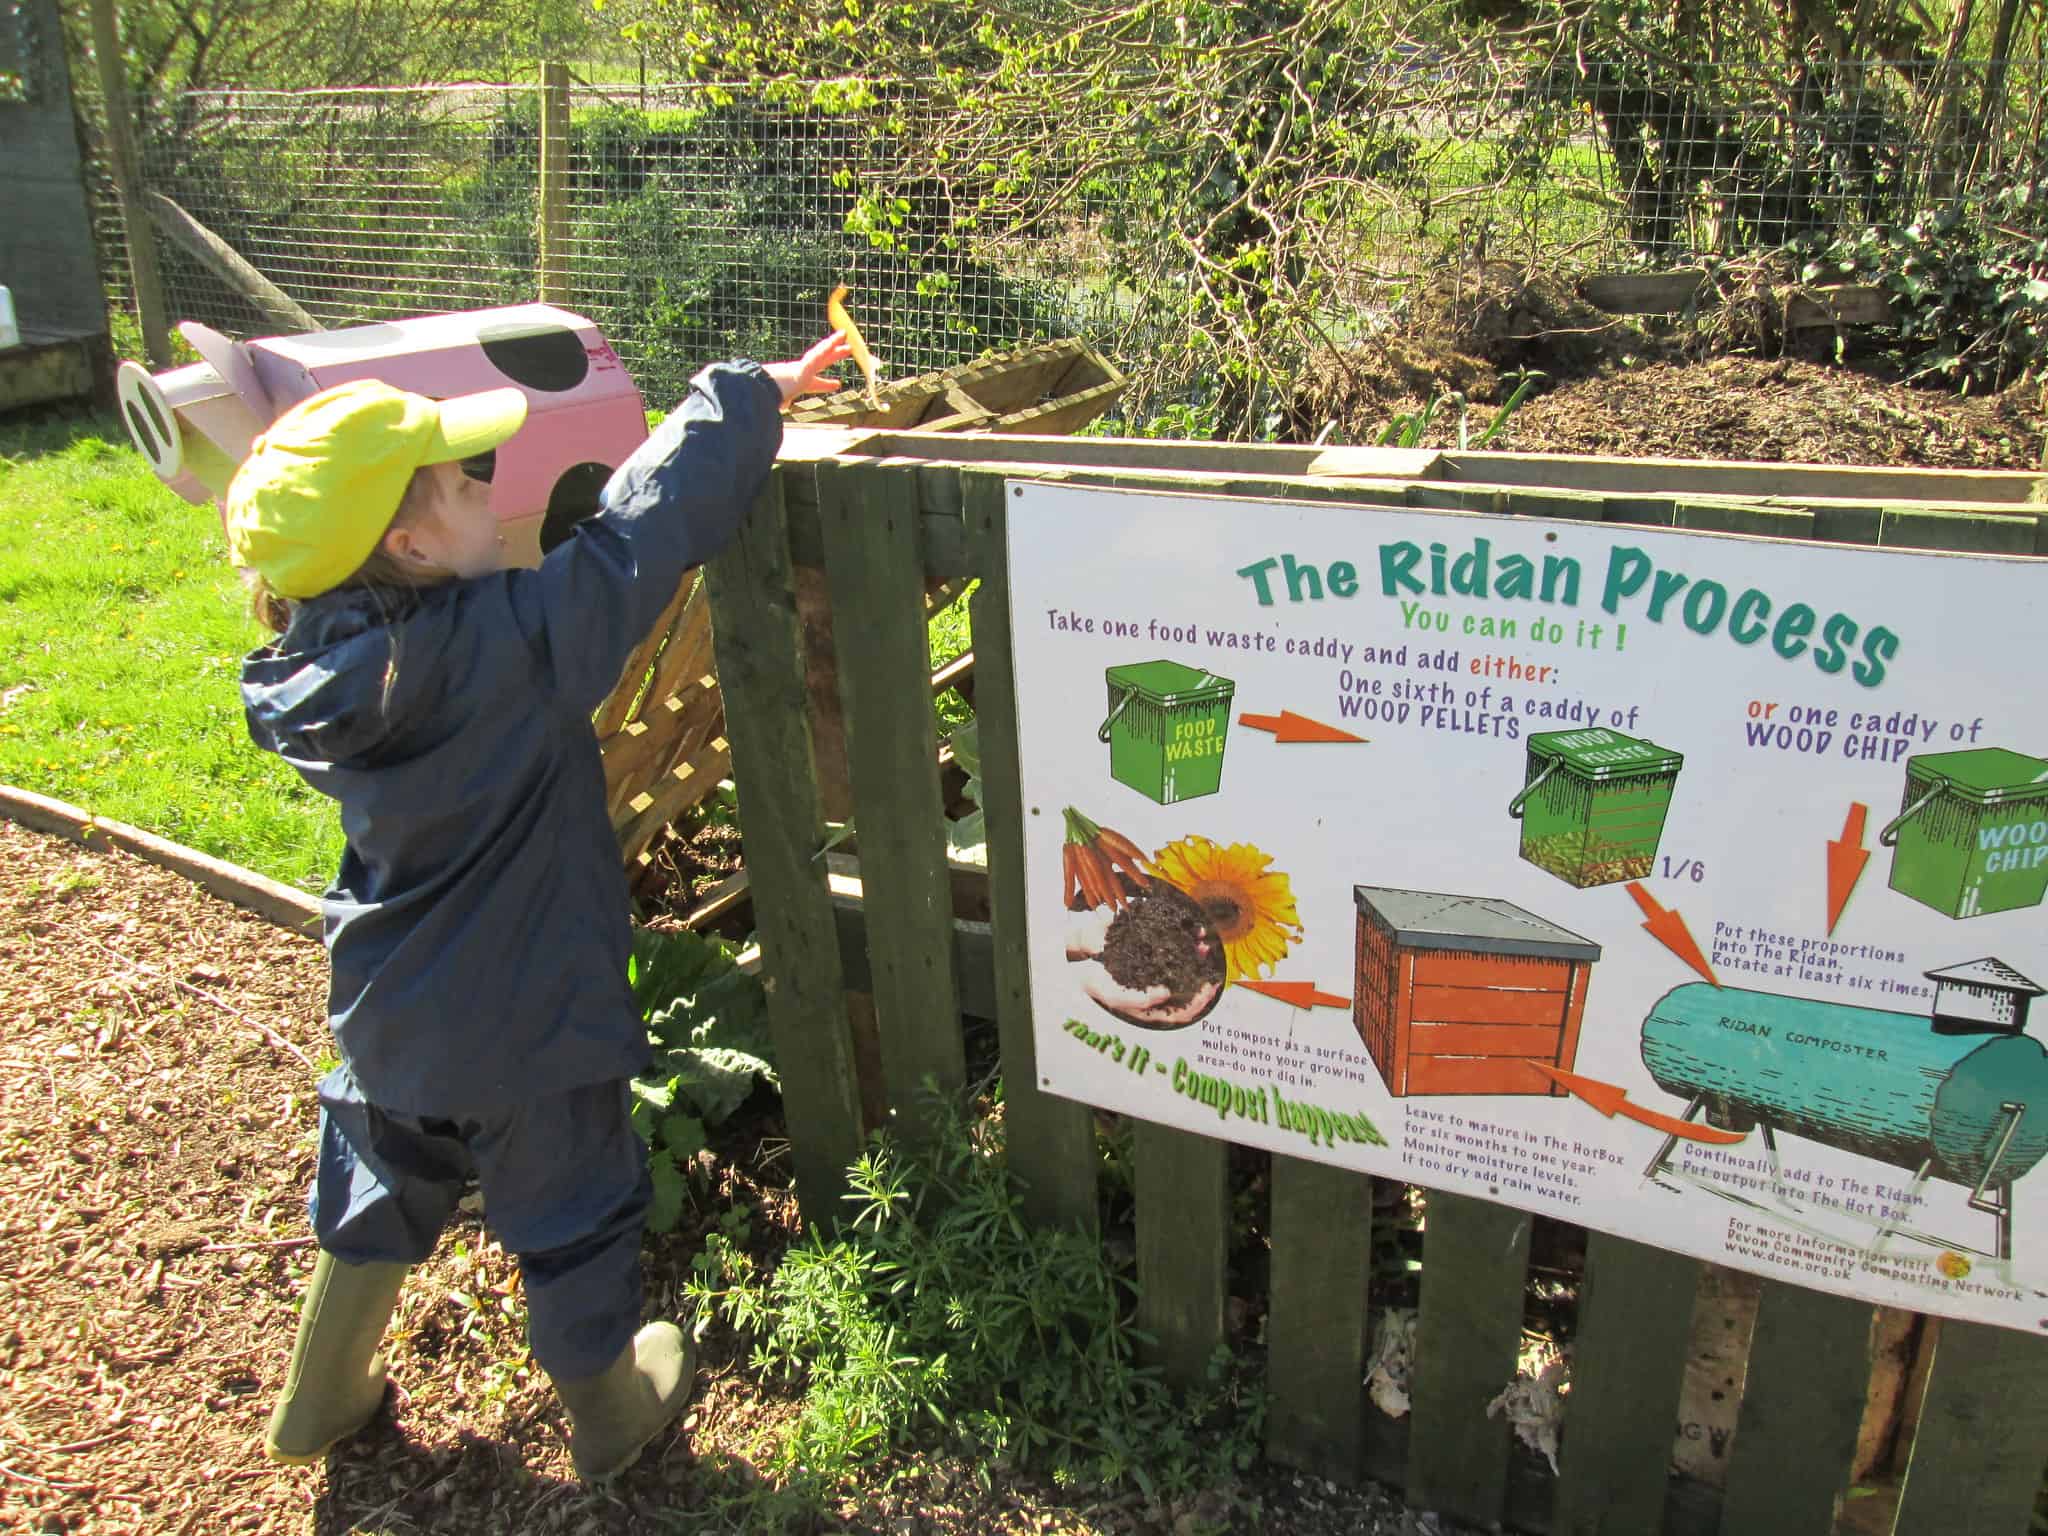 A child puts something in a composting bin